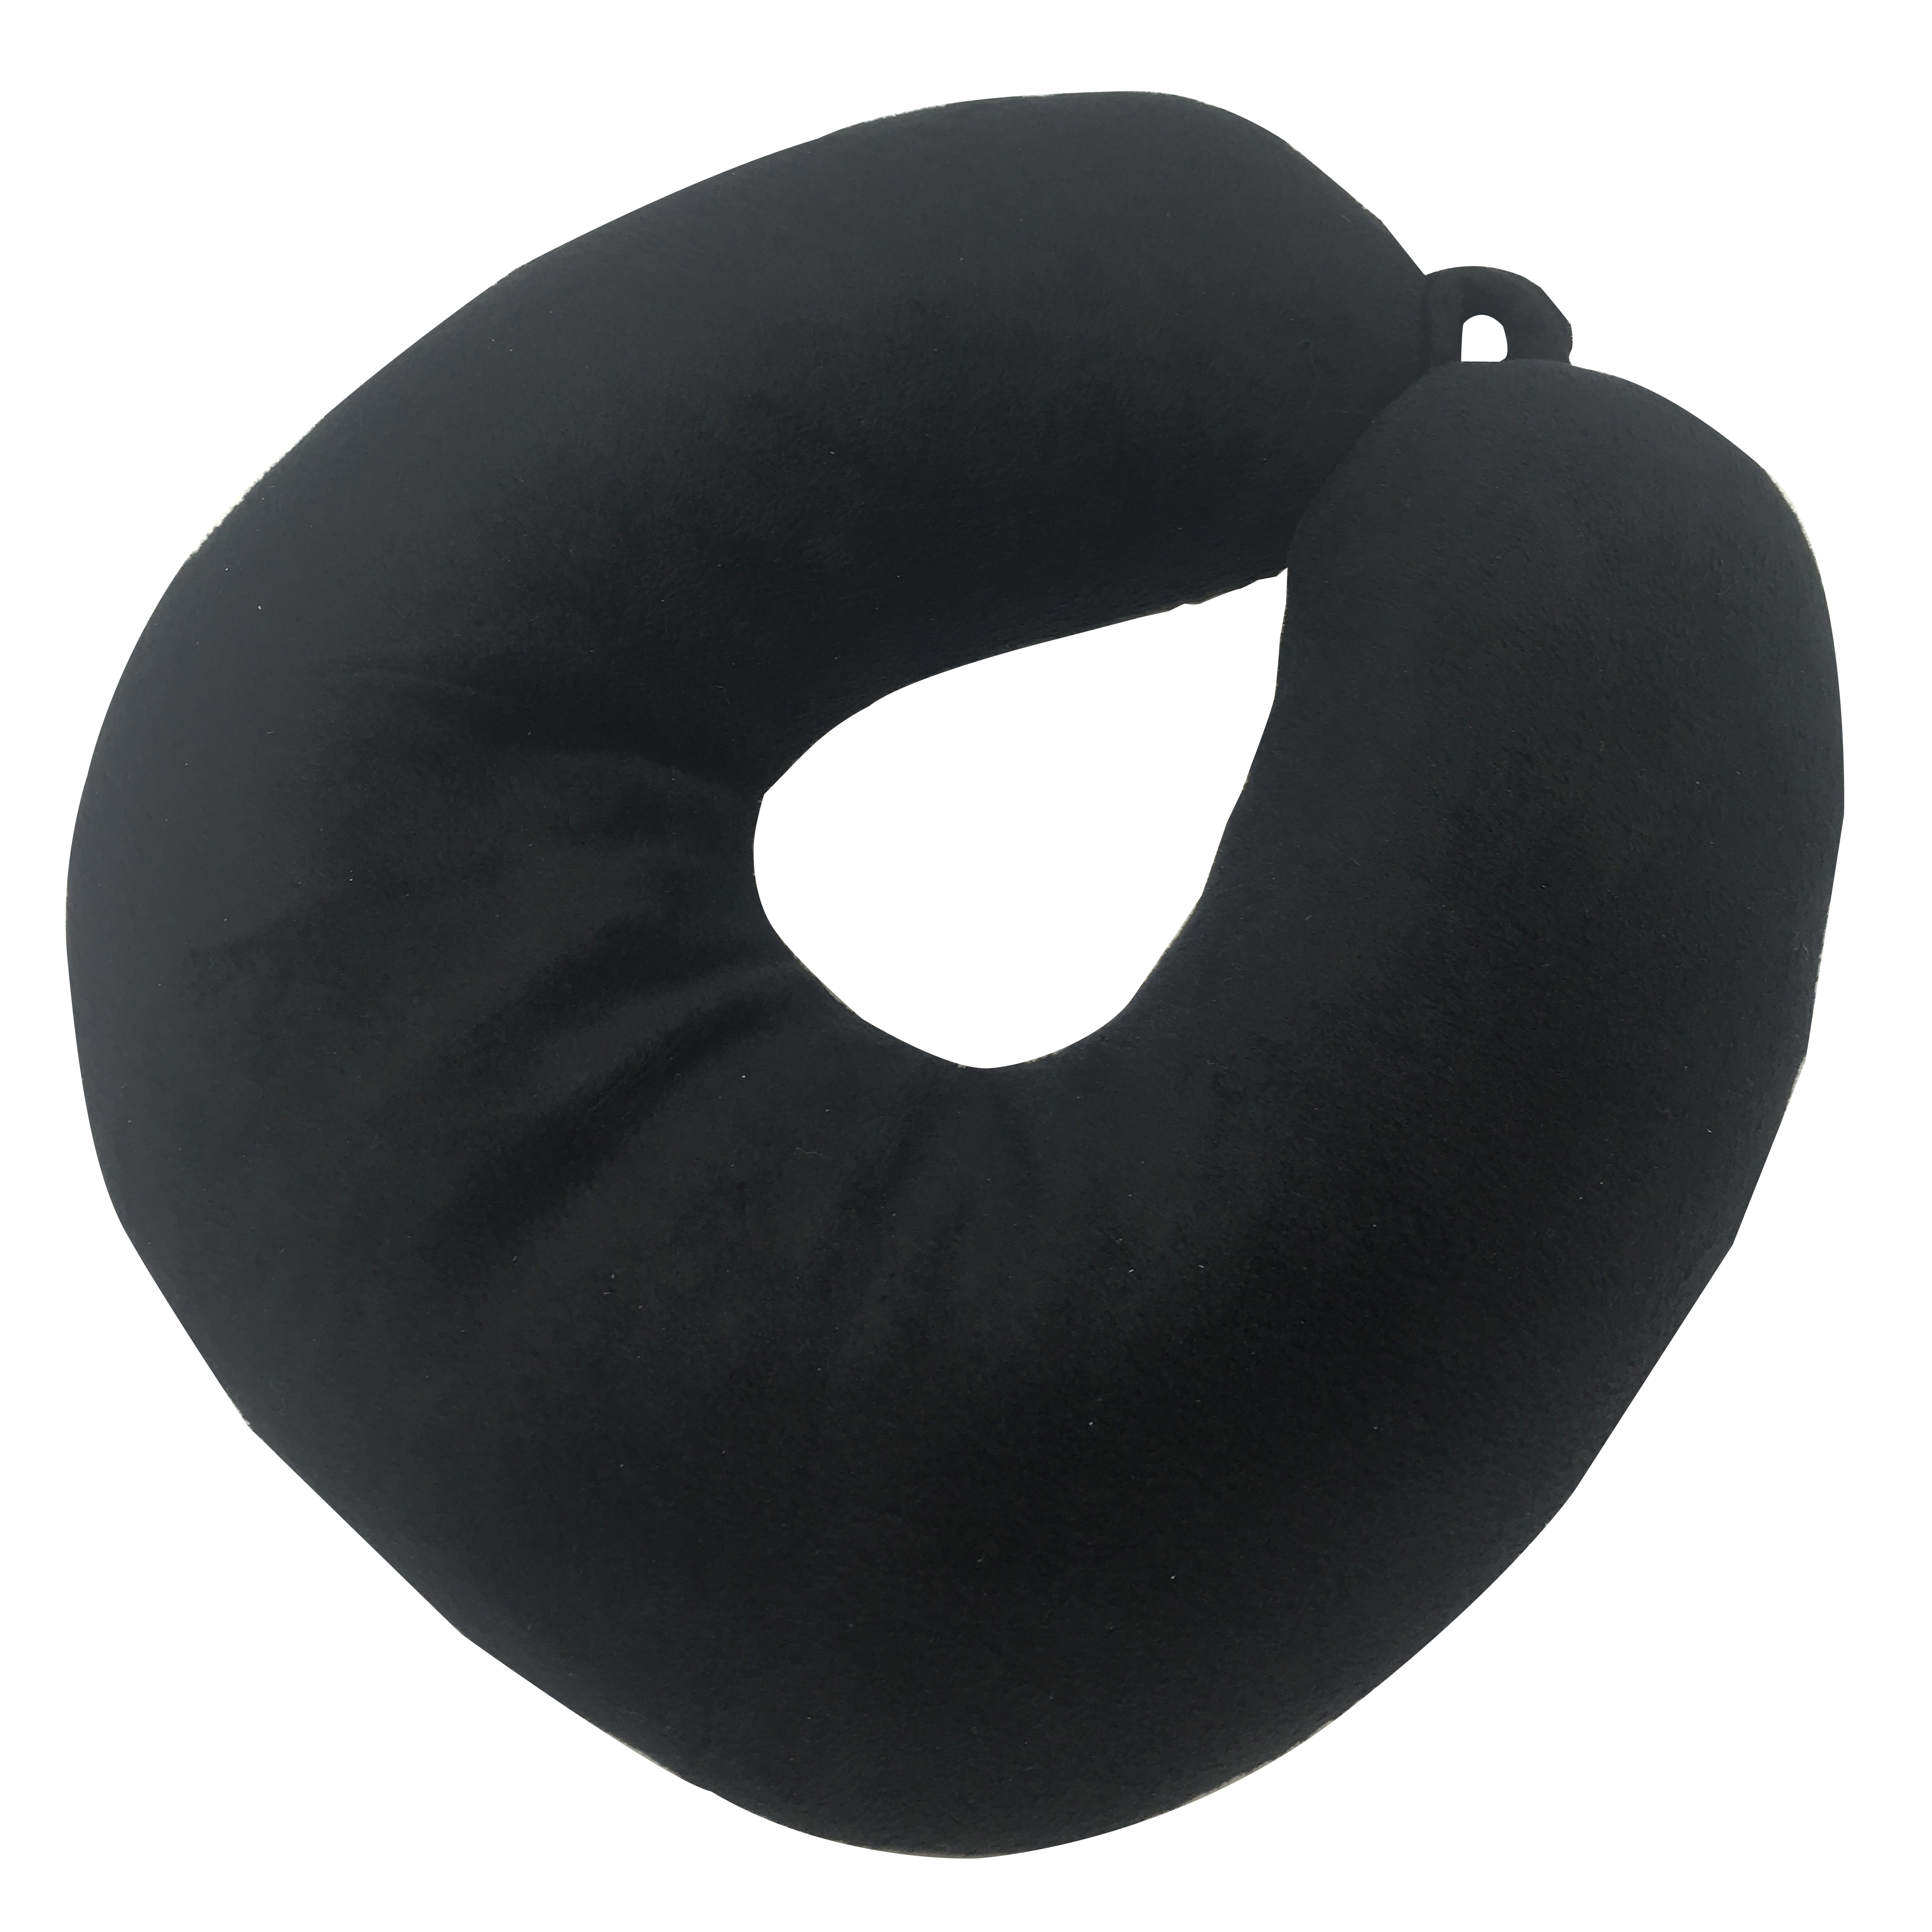 PurWell Memory Foam Microbead Travel Neck Pillow for